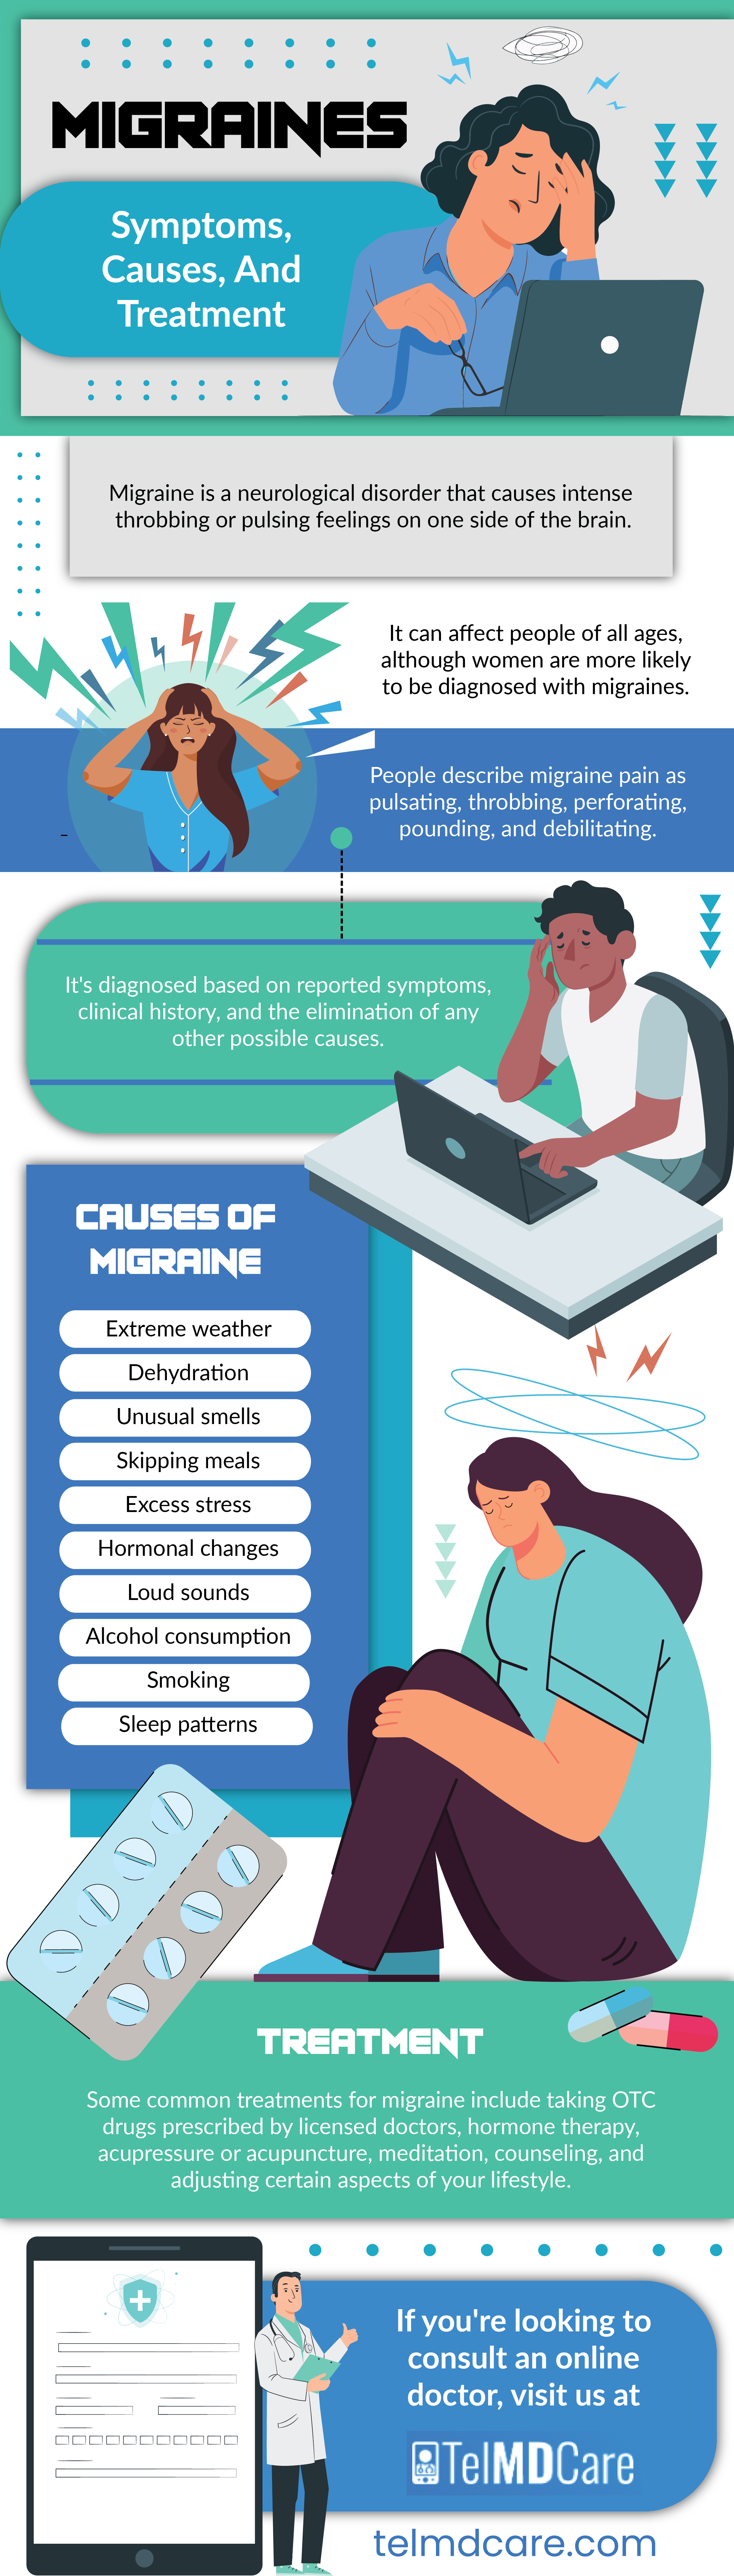 Migranes Symptoms, Causes And Treatment